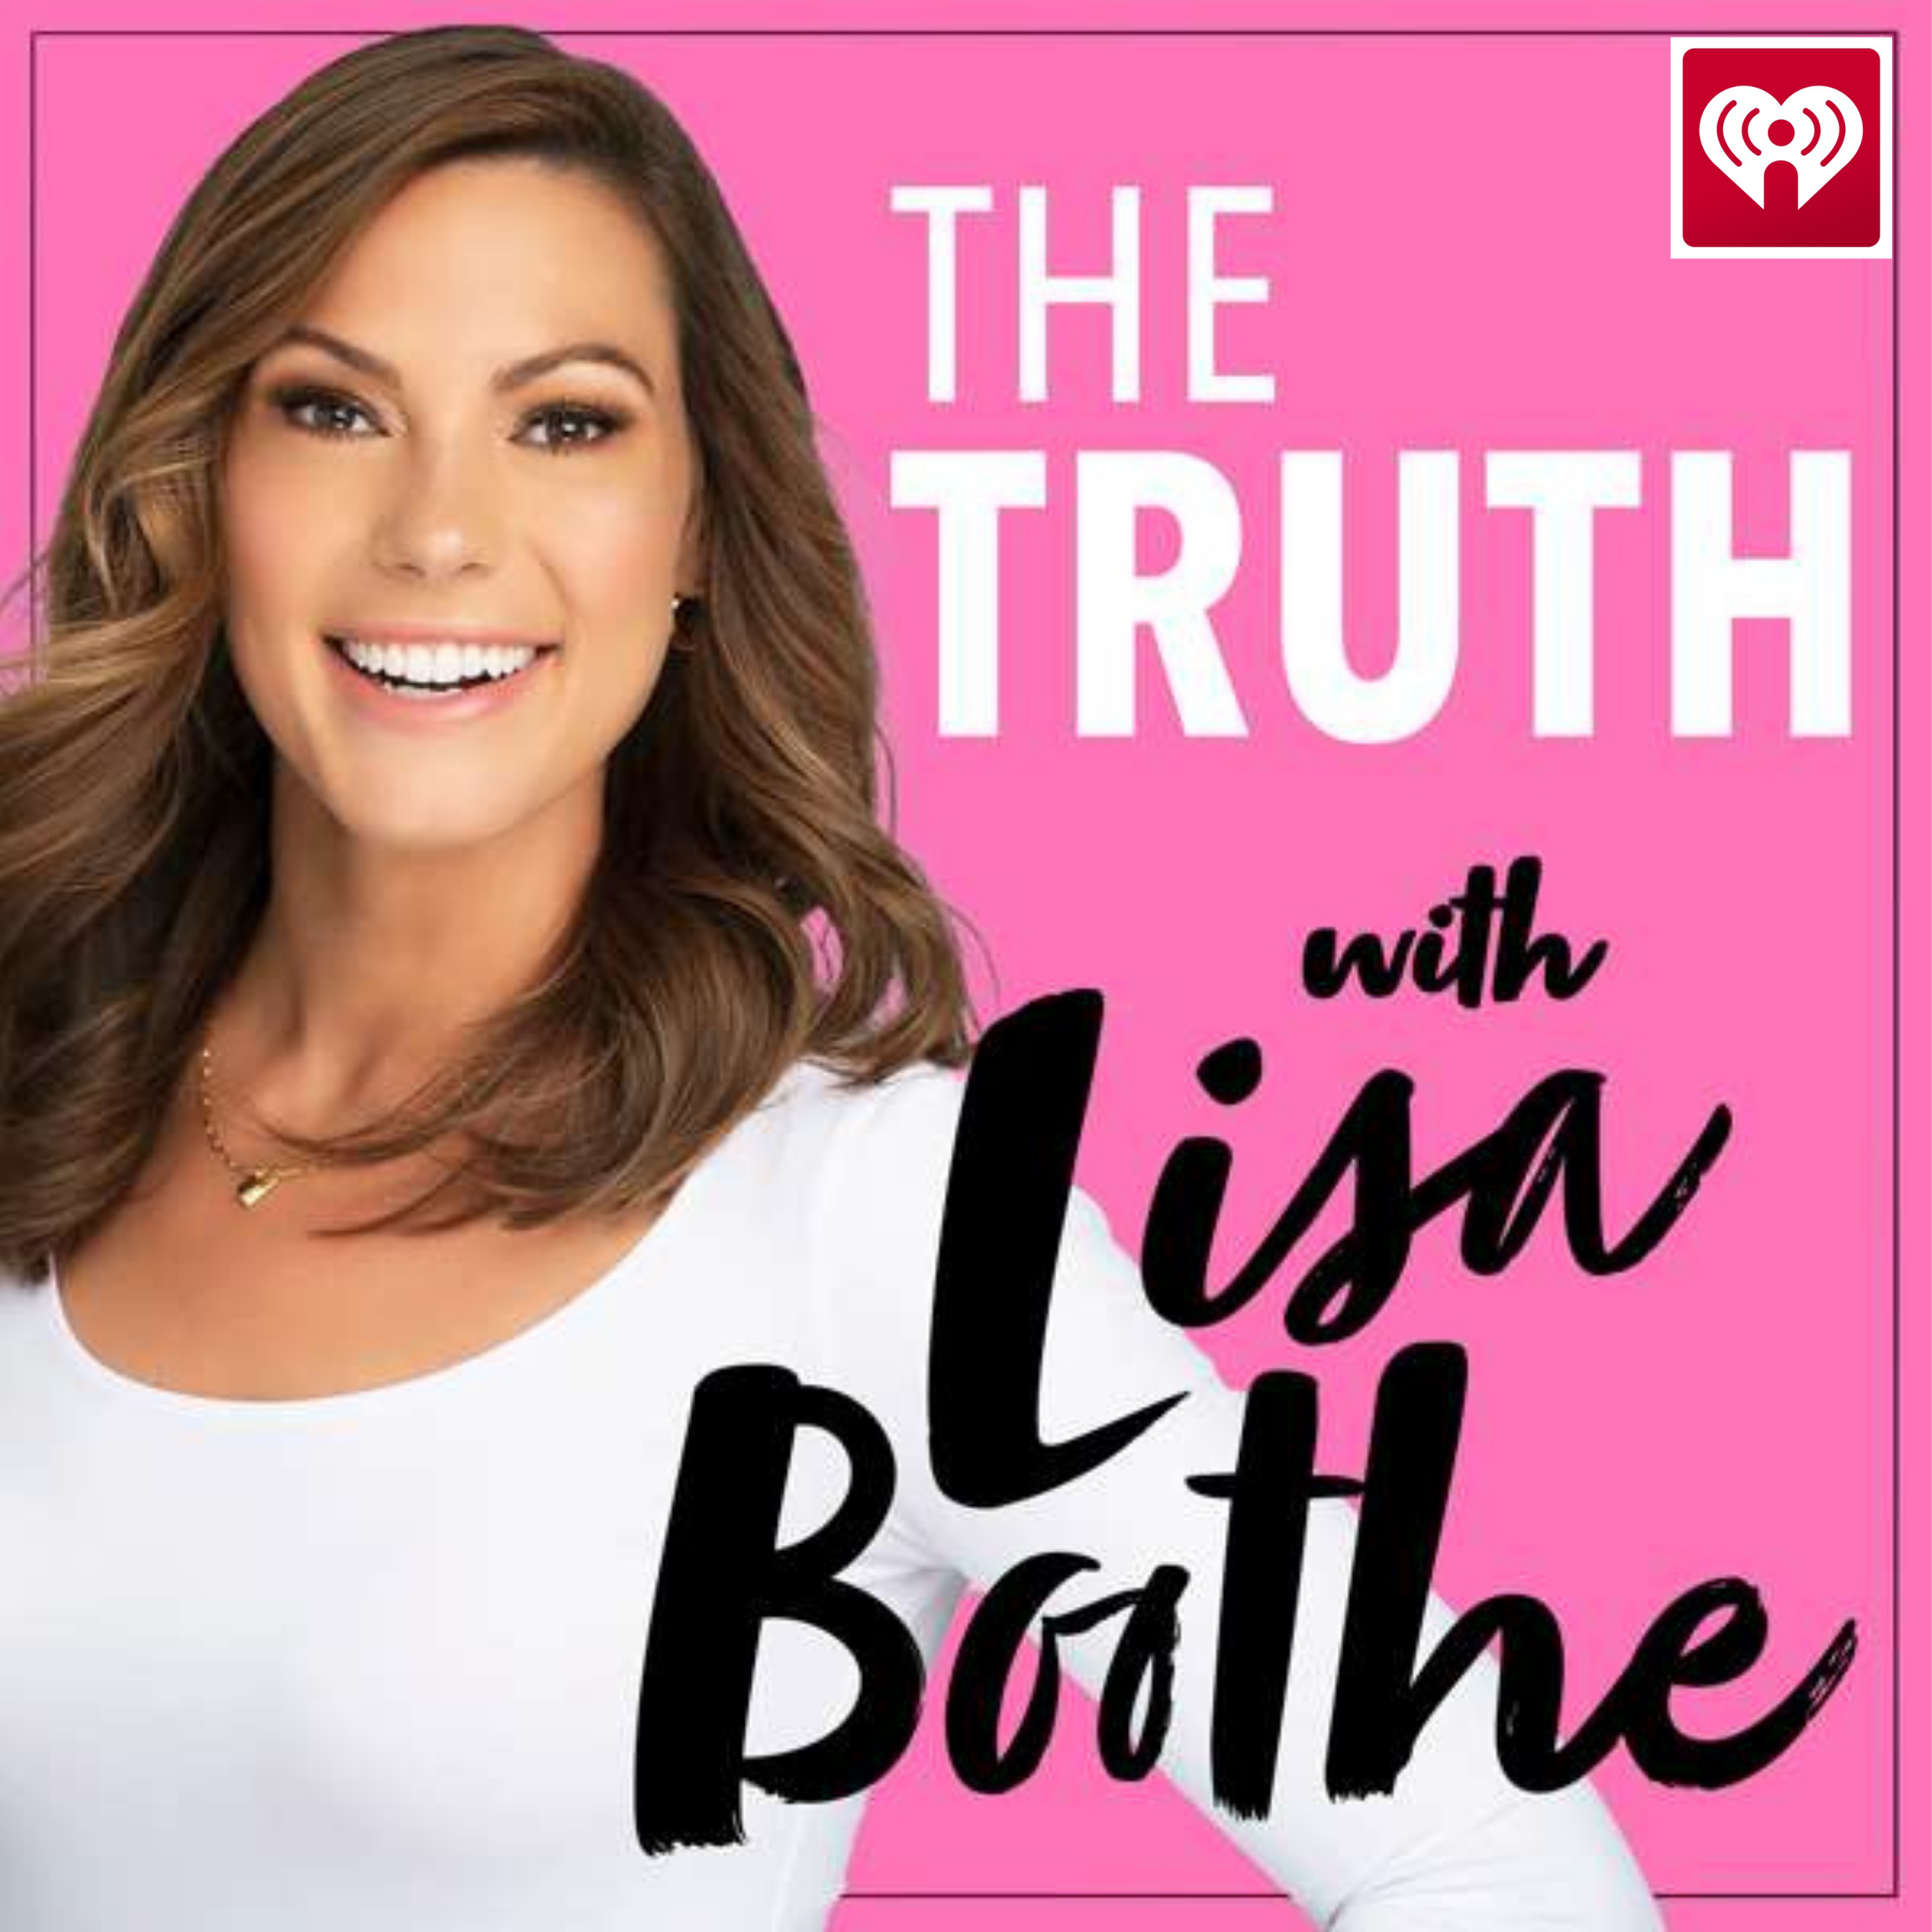 The Truth with Lisa Boothe: Trump’s Path to 270 Electoral Votes with John McLaughlin